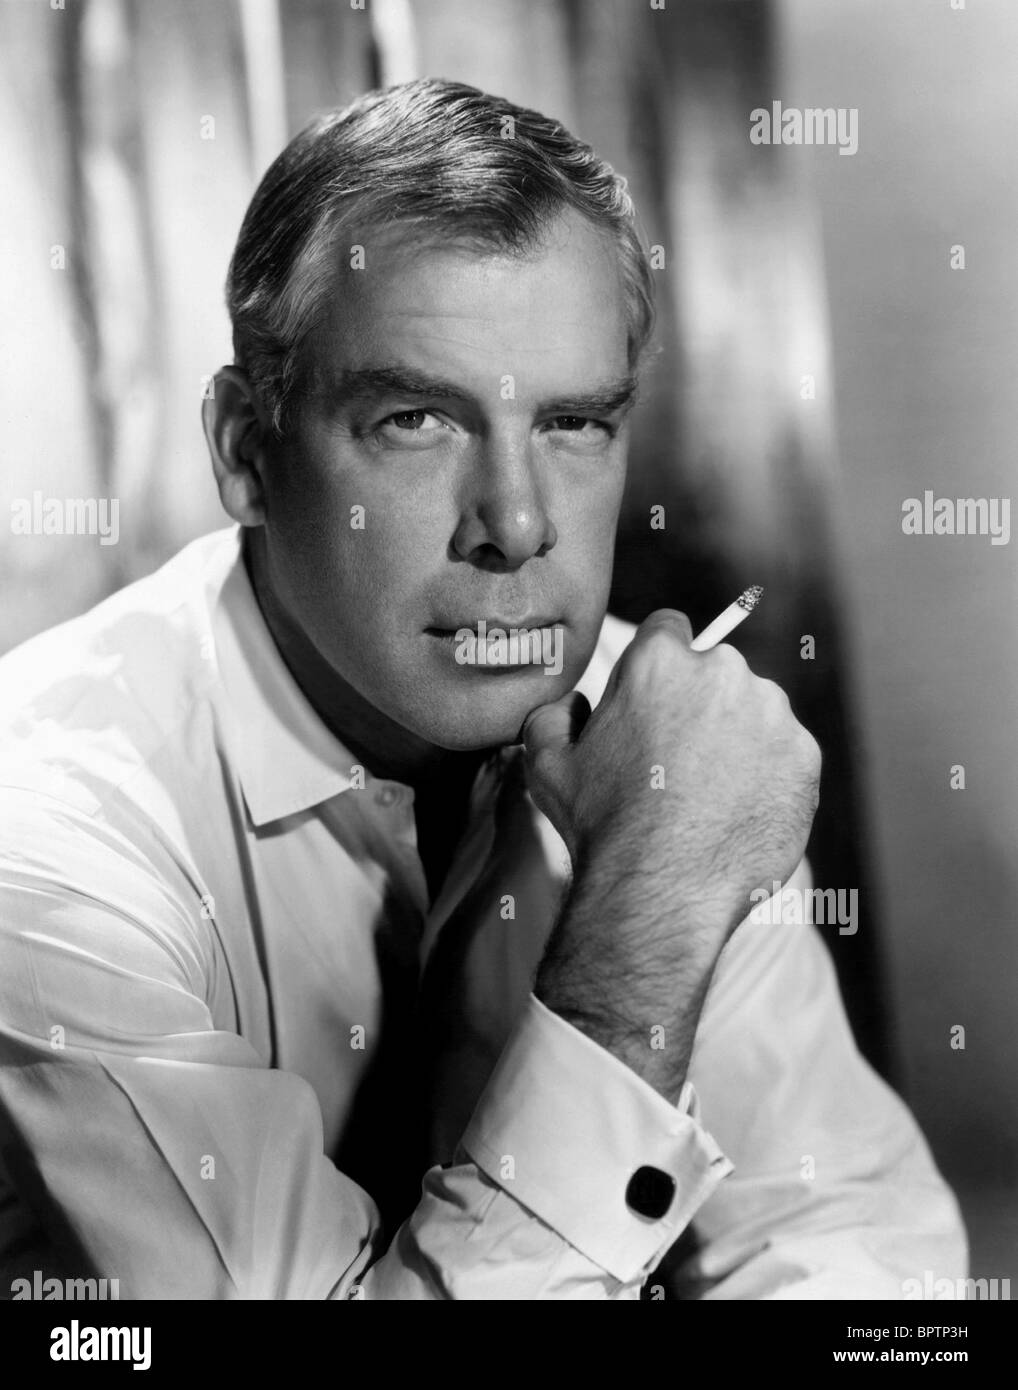 LEE MARVIN ACTOR (1967 Stock Photo - Alamy